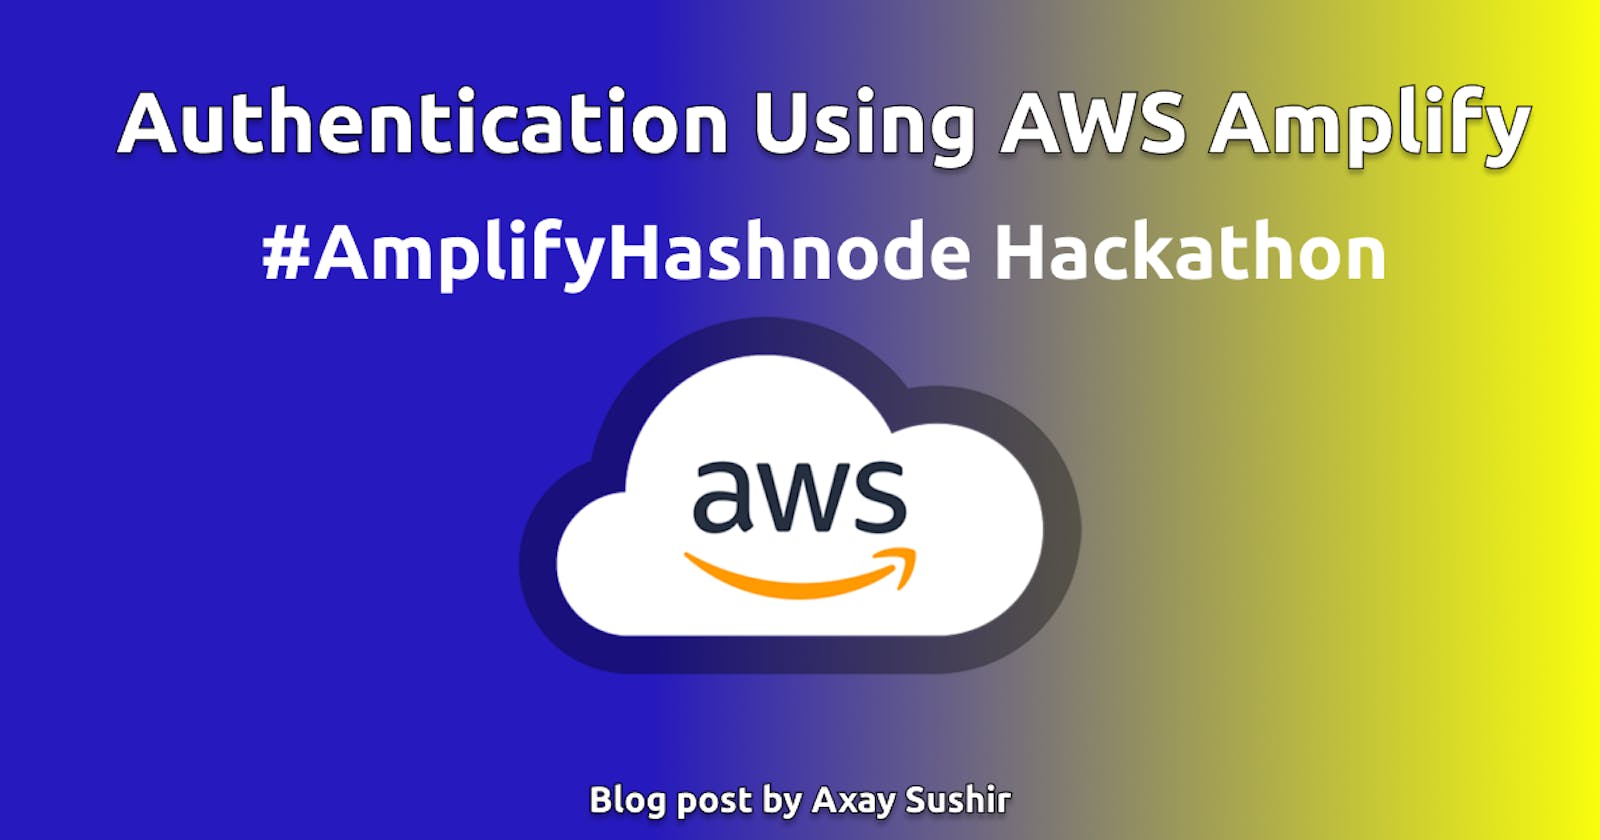 Authentication using AWS Amplify.